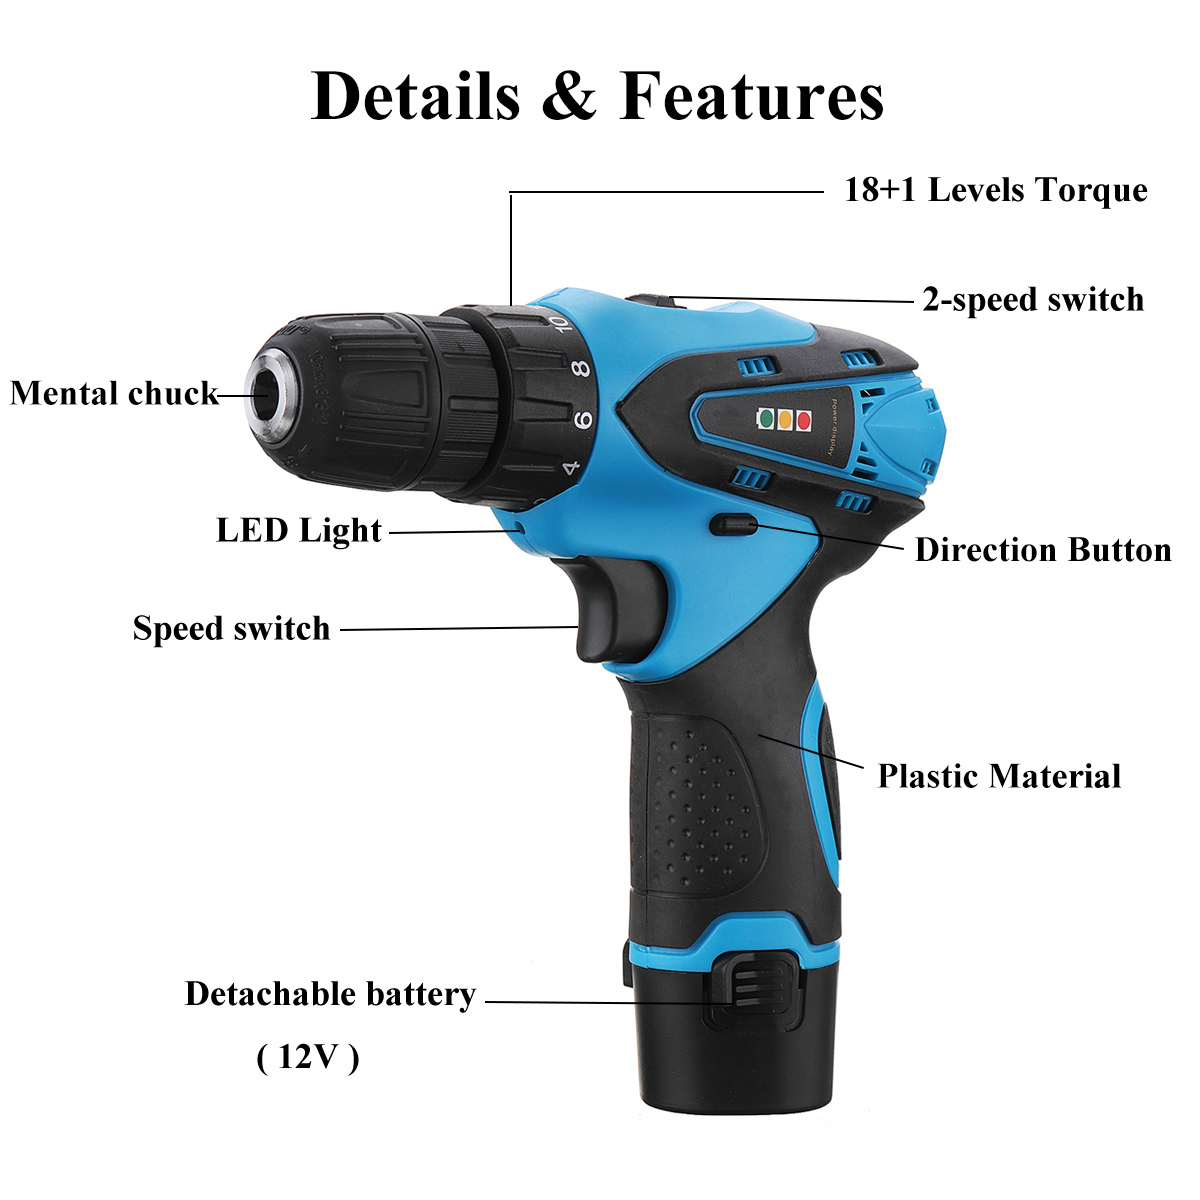 VOTO-12V-Cordless-Power-Drill-Driver-Screw-2-Speed-Lithium-ion-Electric-Screwdriver-with-Battery-1289387-5